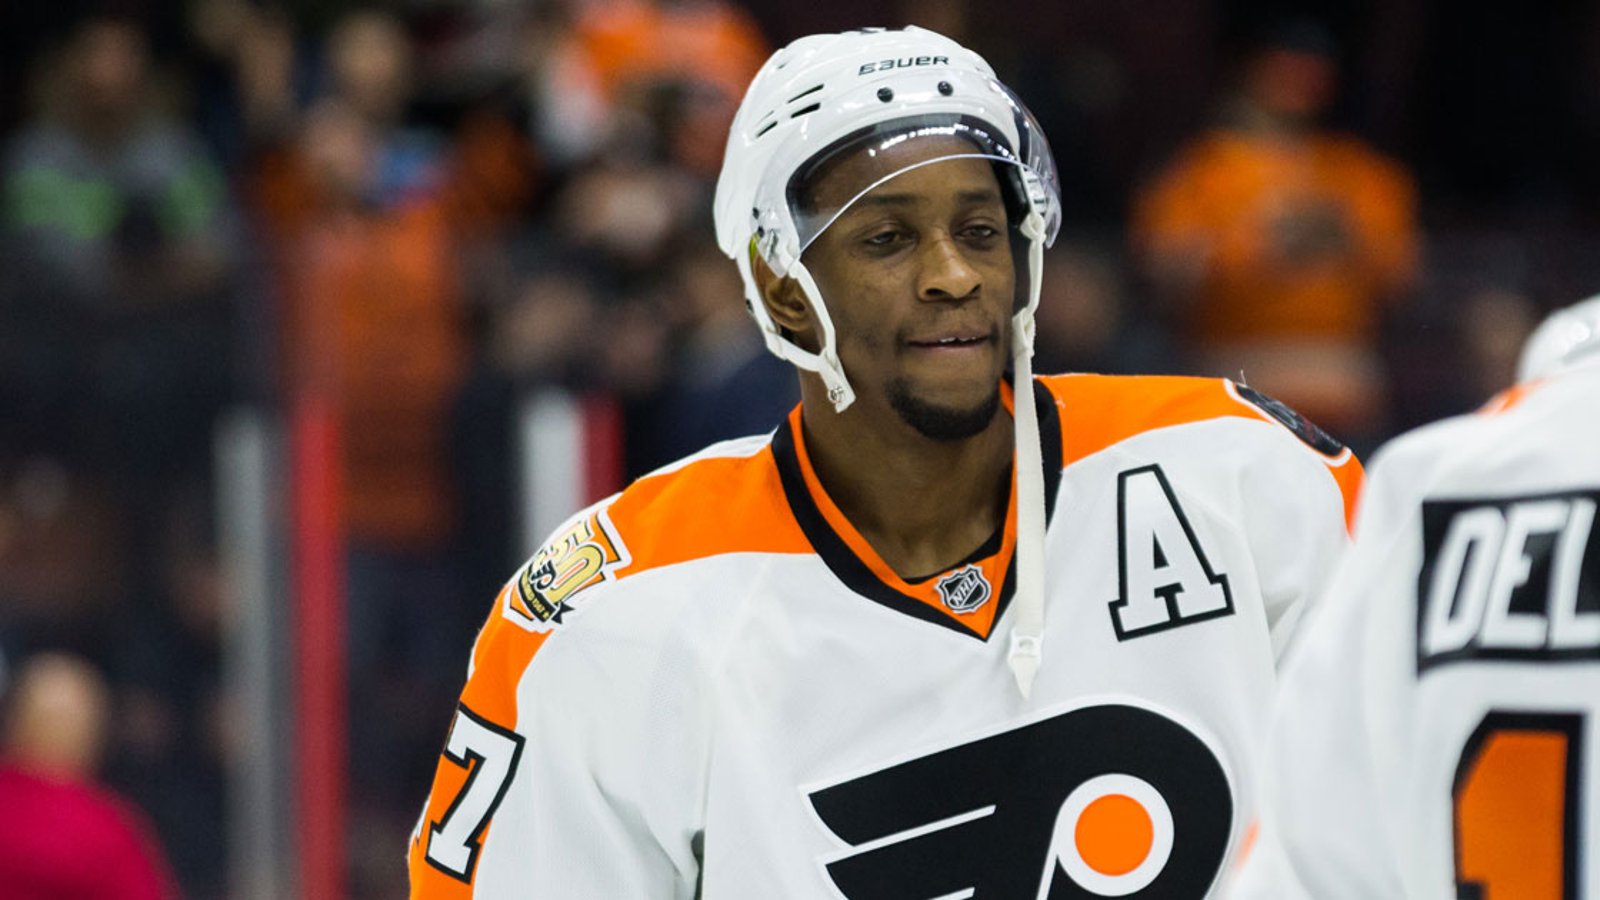 Flyers’ Simmonds weighs in on anthem protests